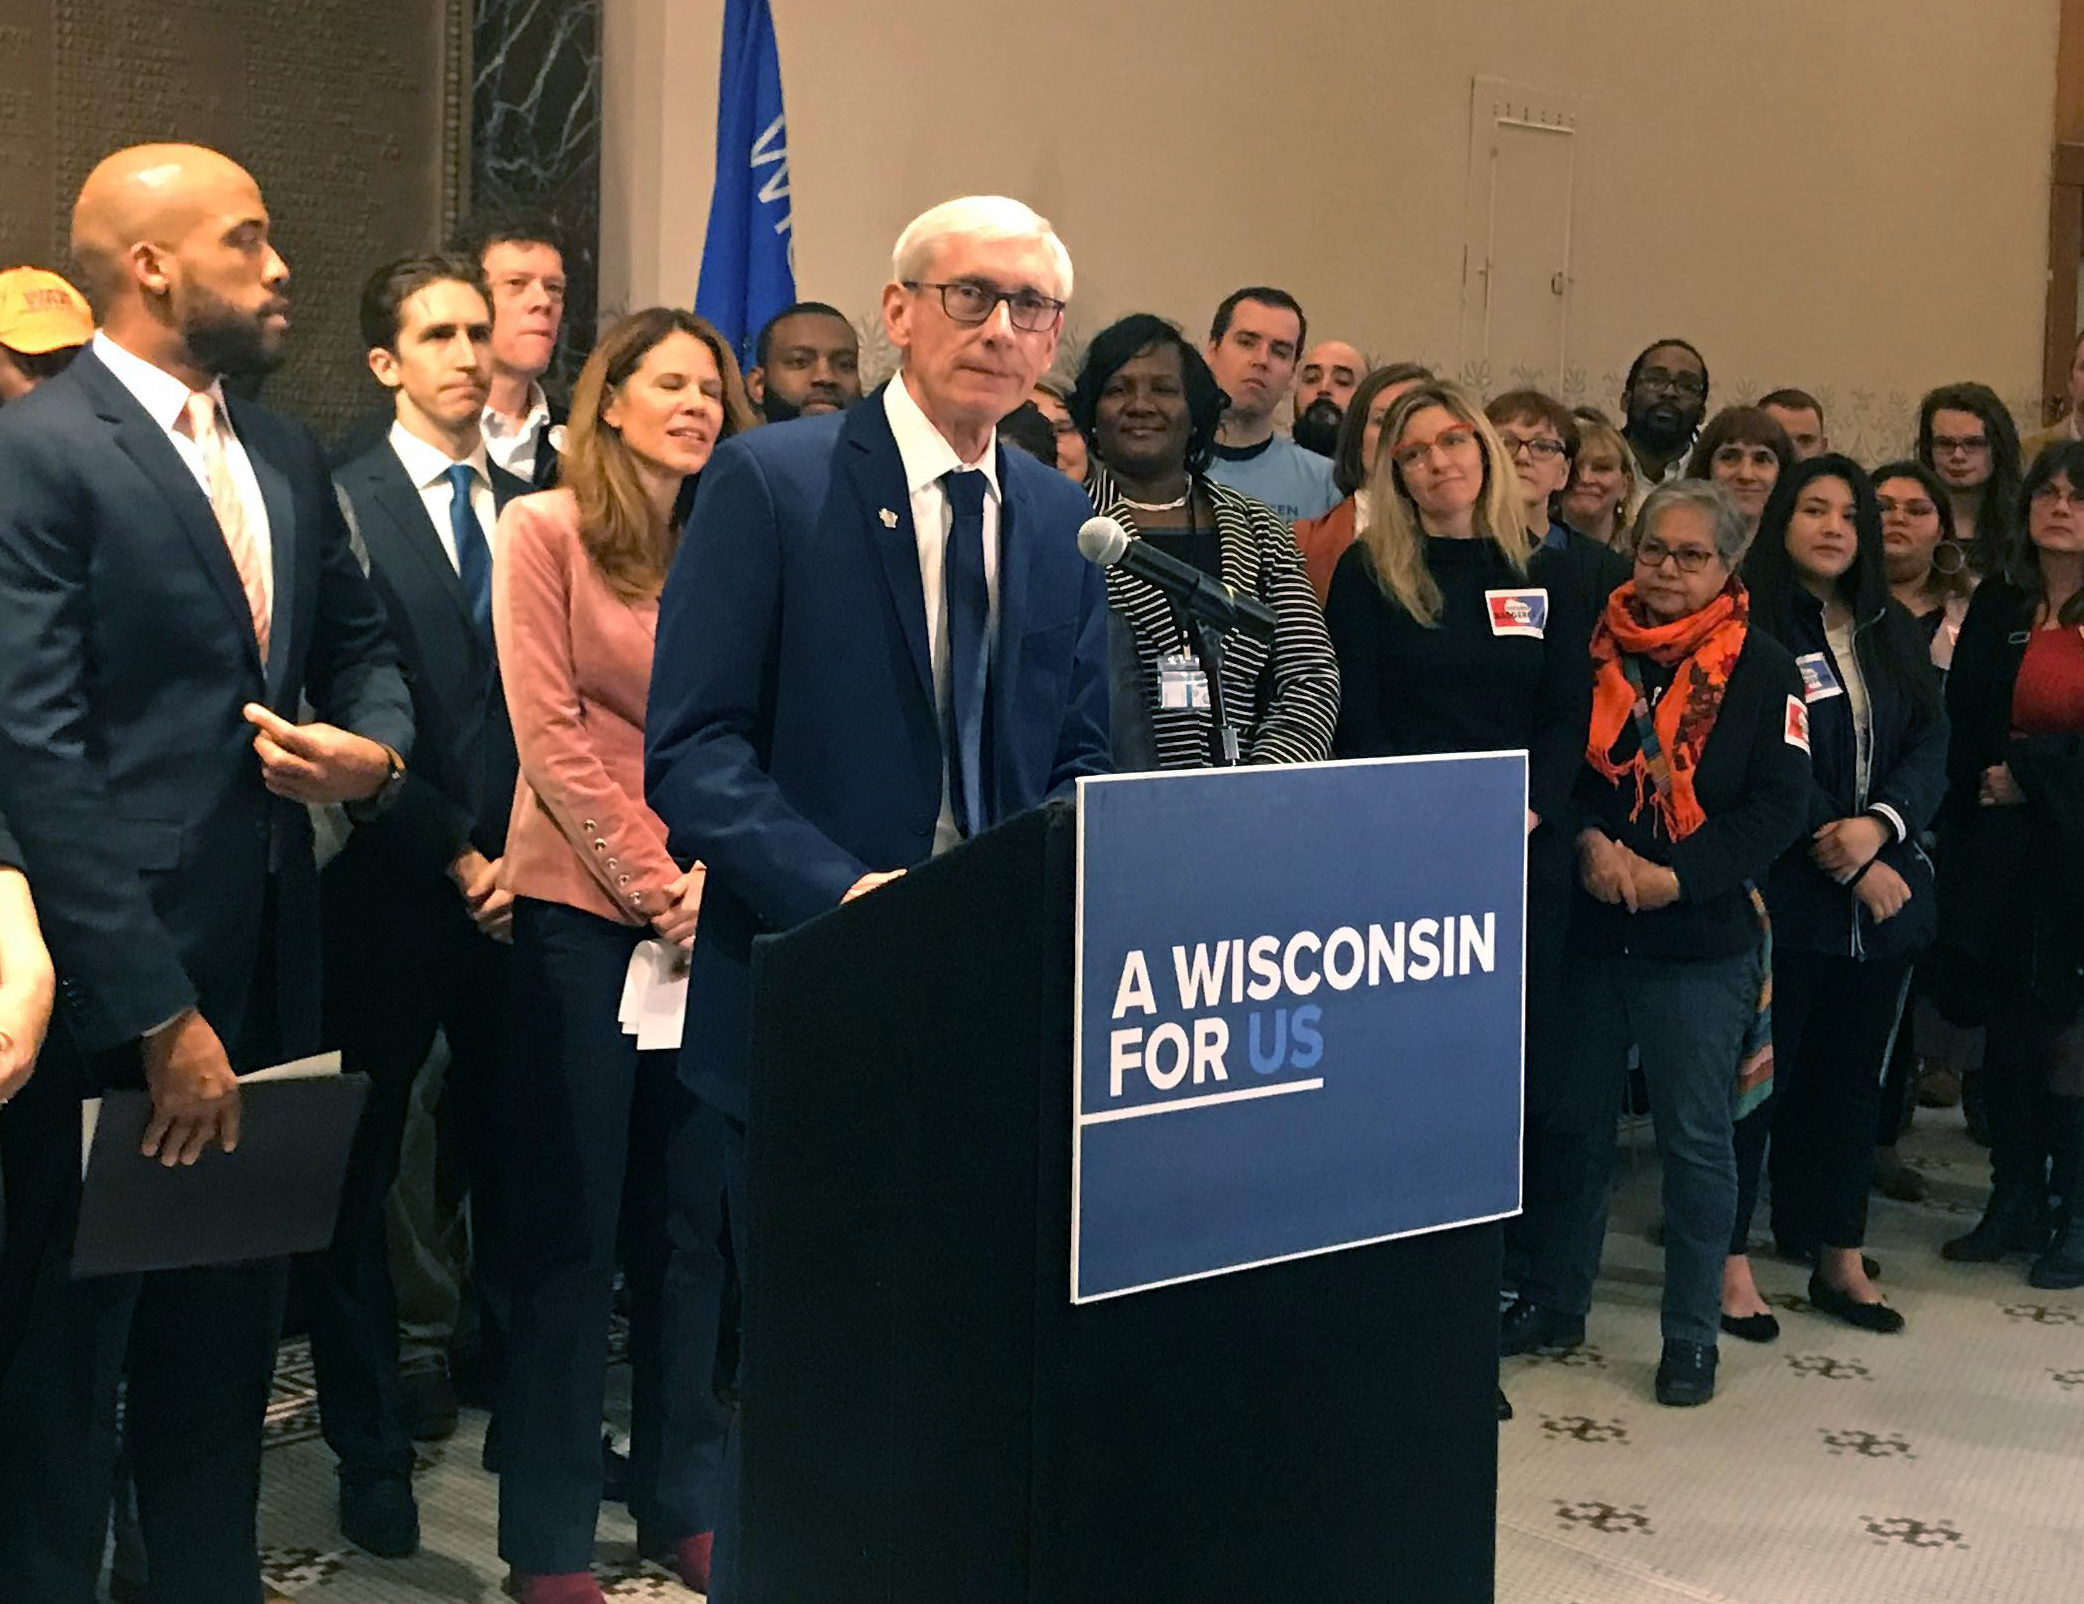 Evers speaking at press conference